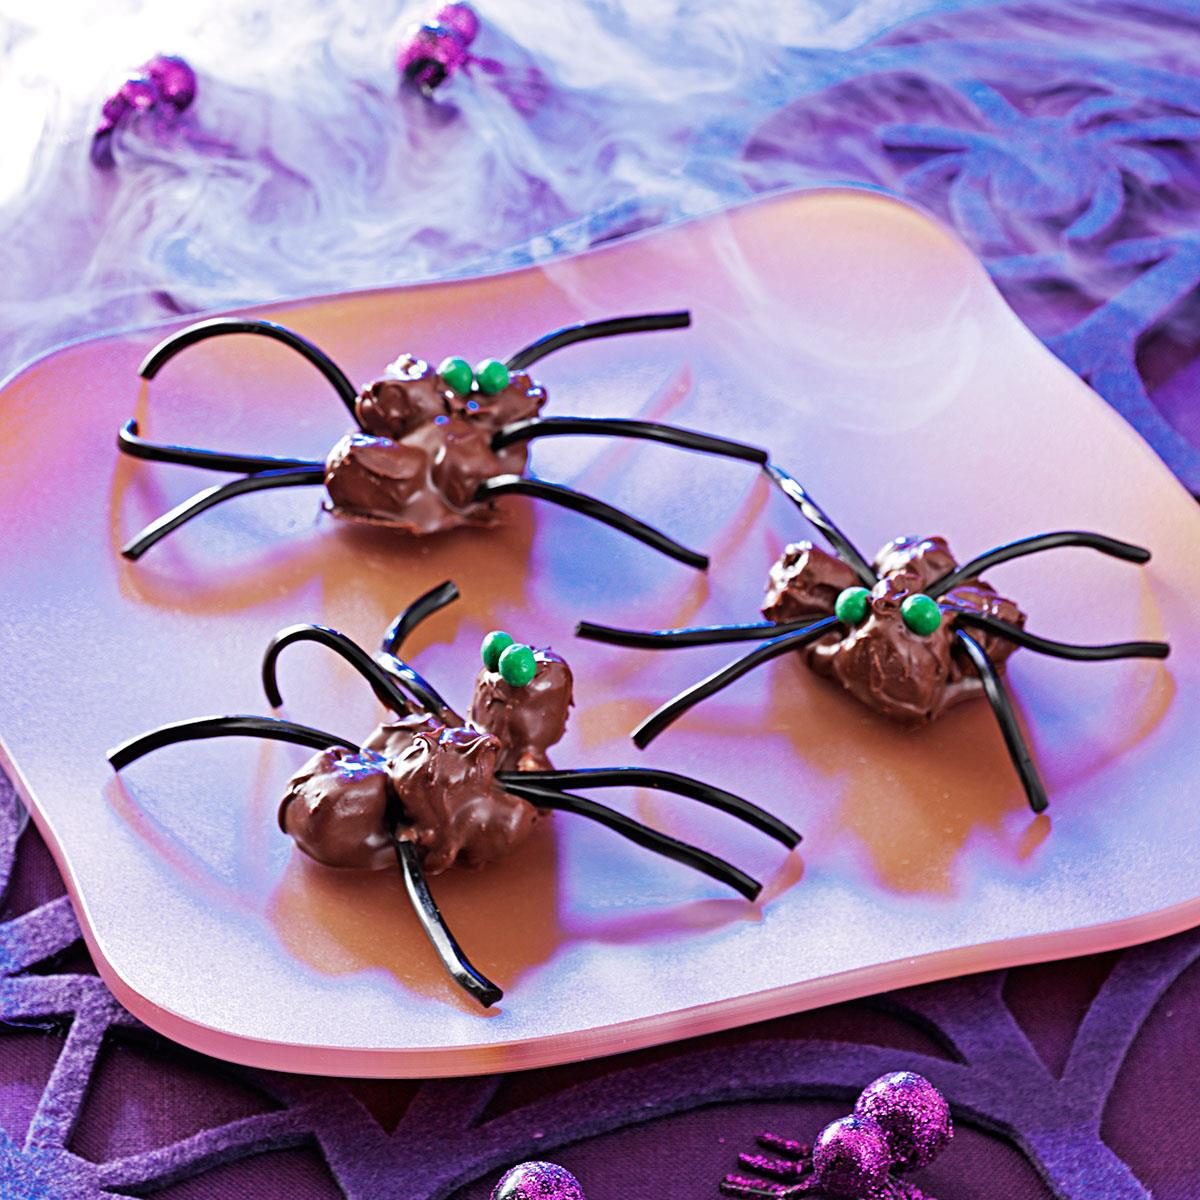 Halloween Chocolate Spiders Exps11131 Uh2464847a10 03 4bc Rms 4